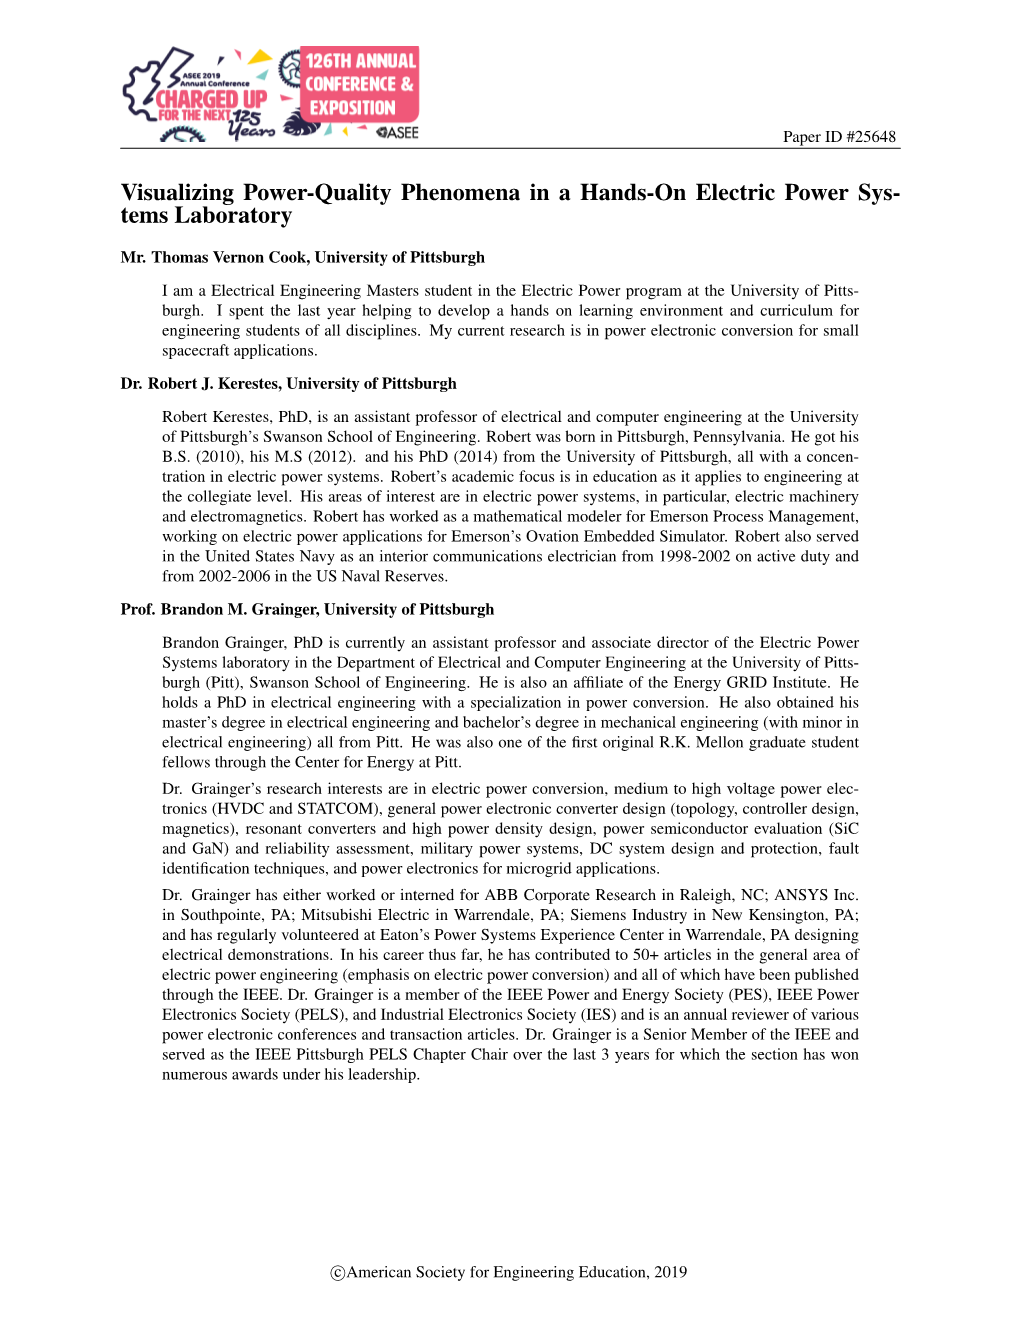 Visualizing Power-Quality Phenomena in a Hands-On Electric Power Systems Laboratory